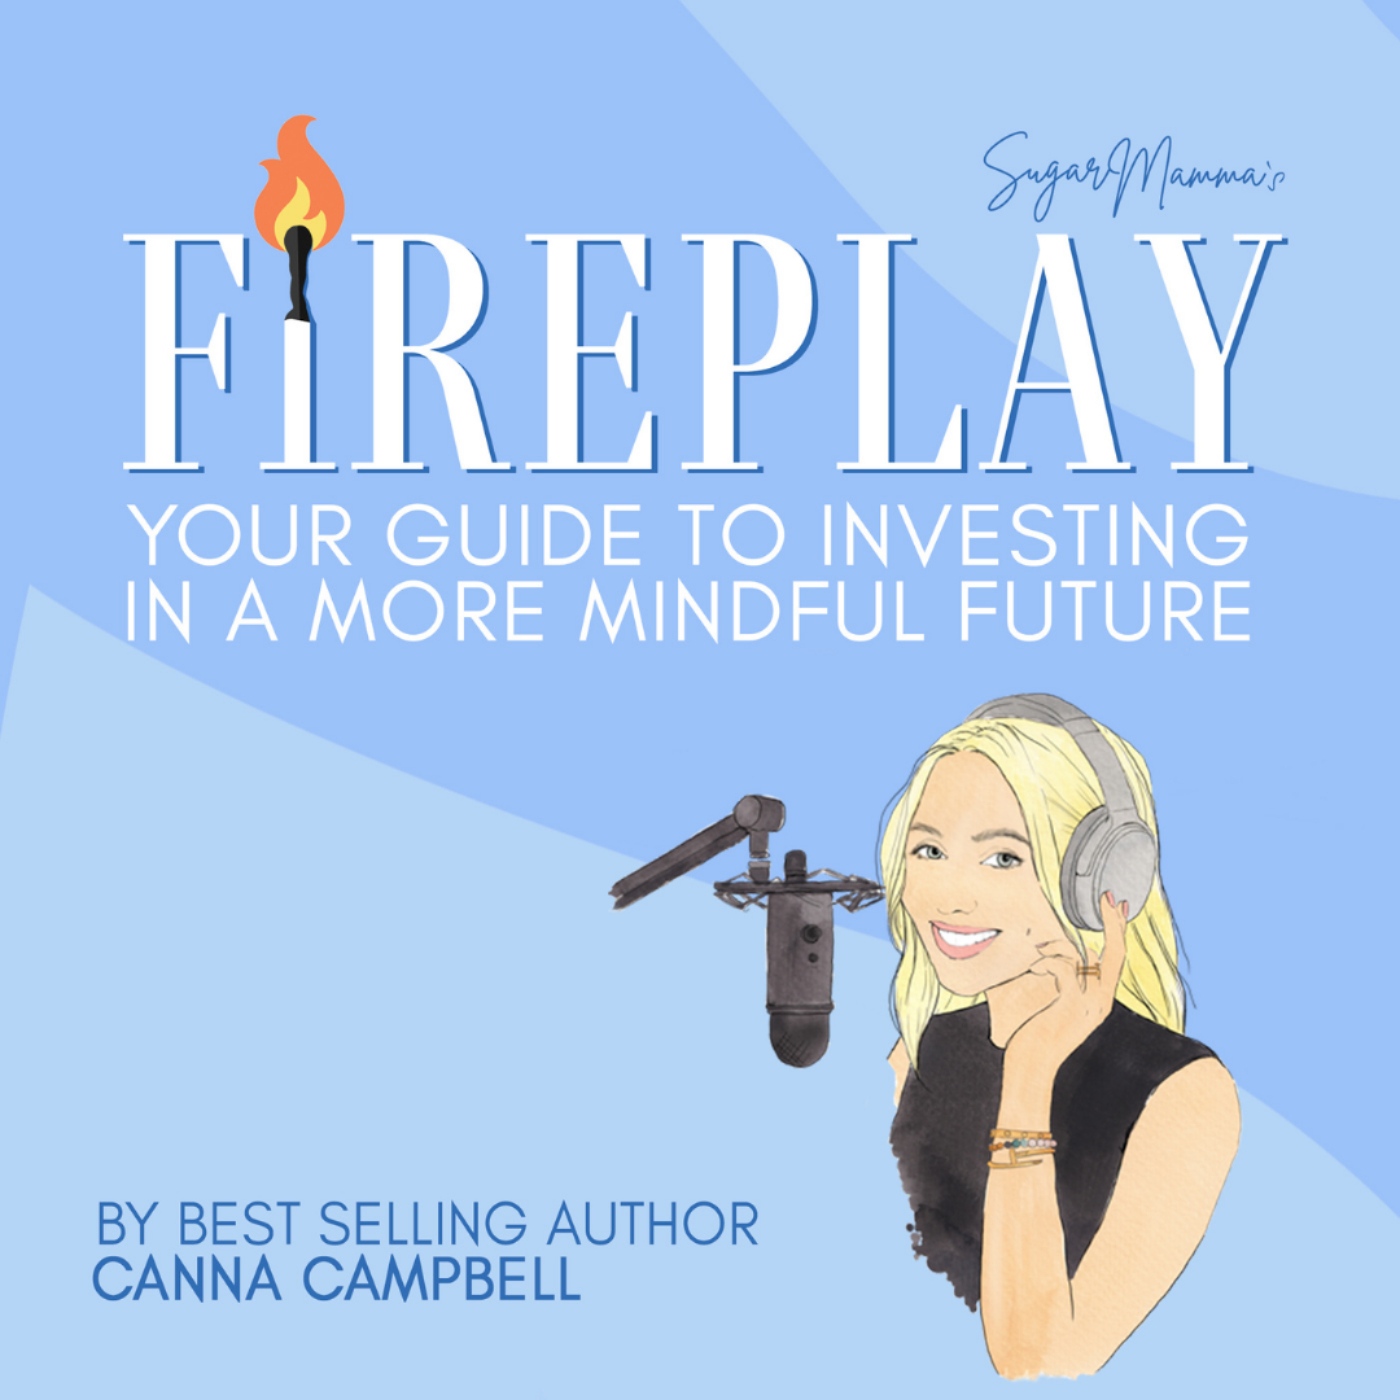 Ep 3: How I invest & stay FOCUSED on my money goals with ADHD